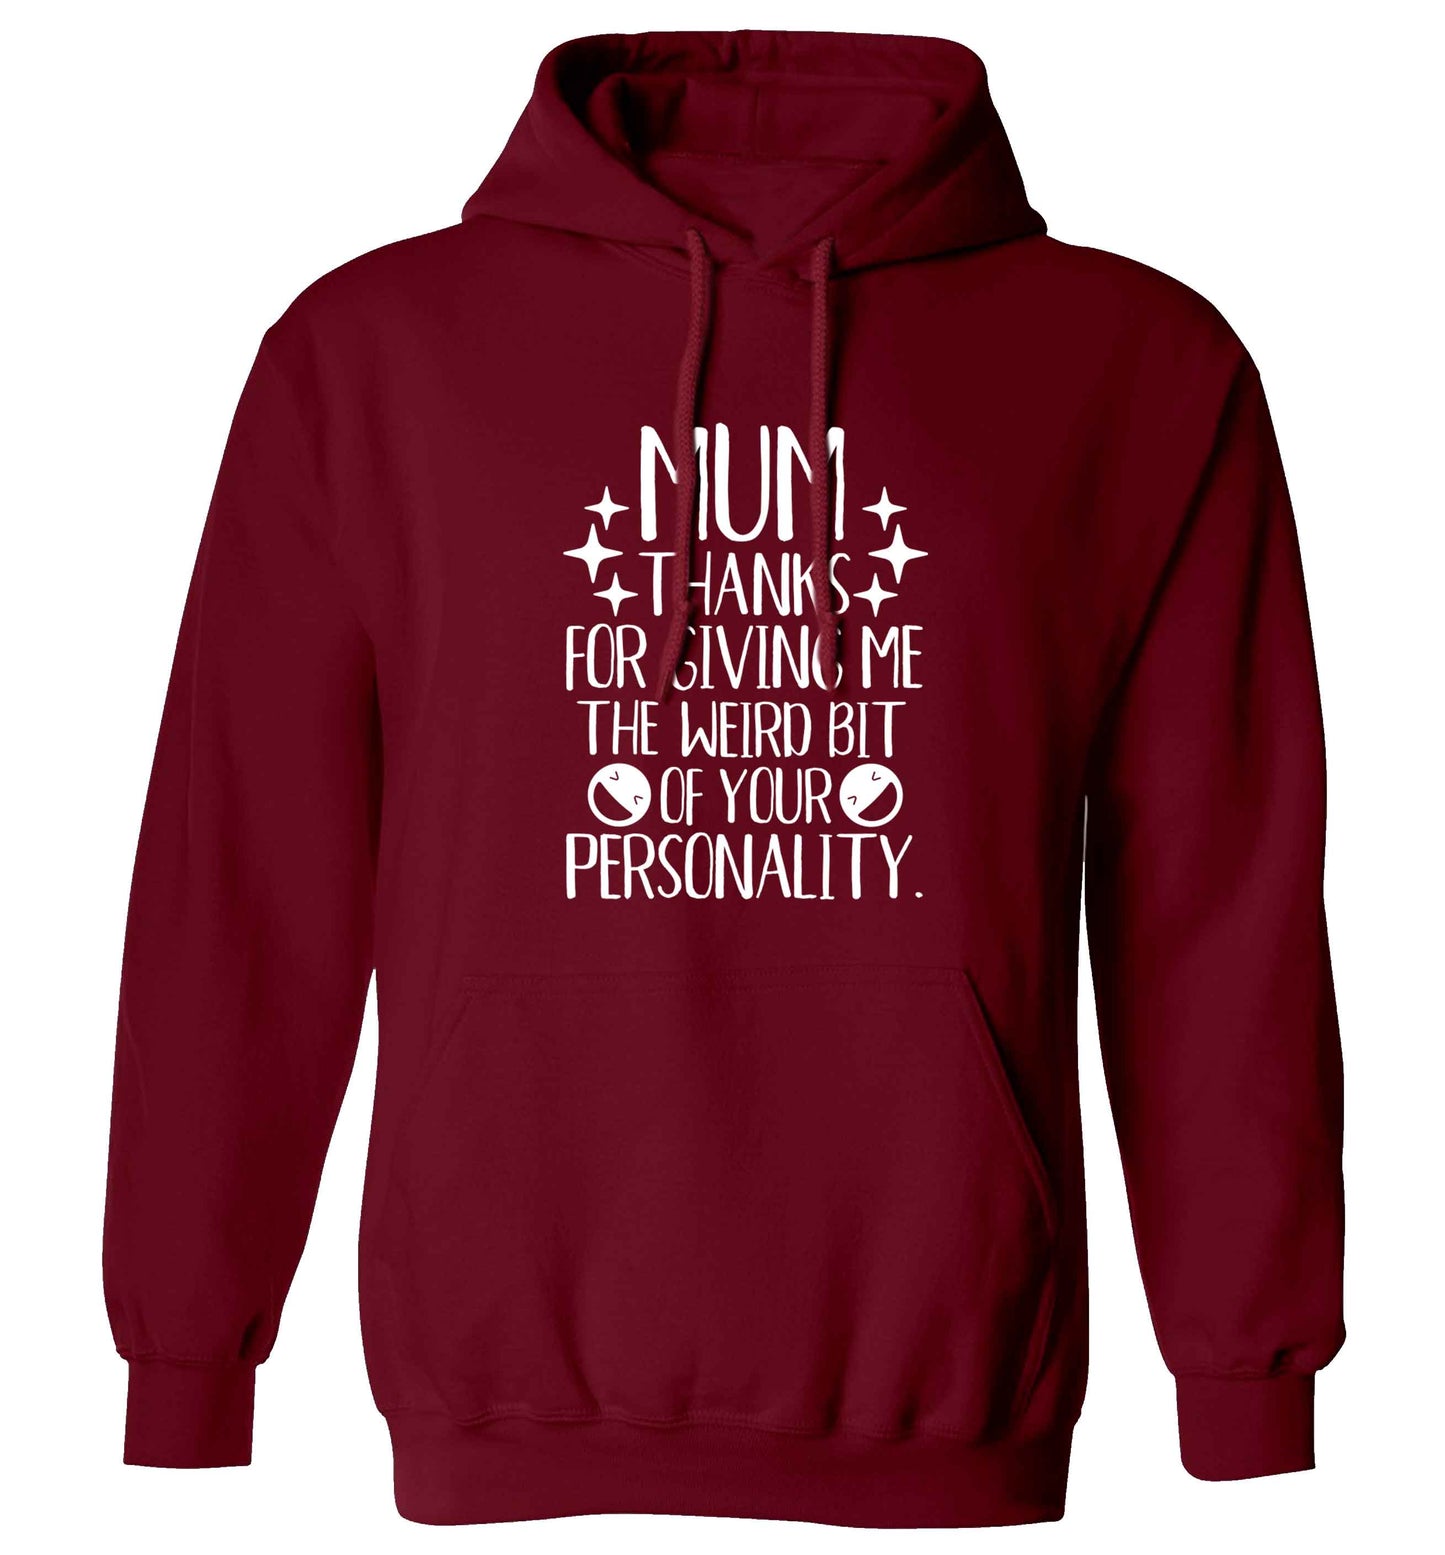 Mum, I love you more than halloumi and if you know me at all you know how deep that is adults unisex maroon hoodie 2XL